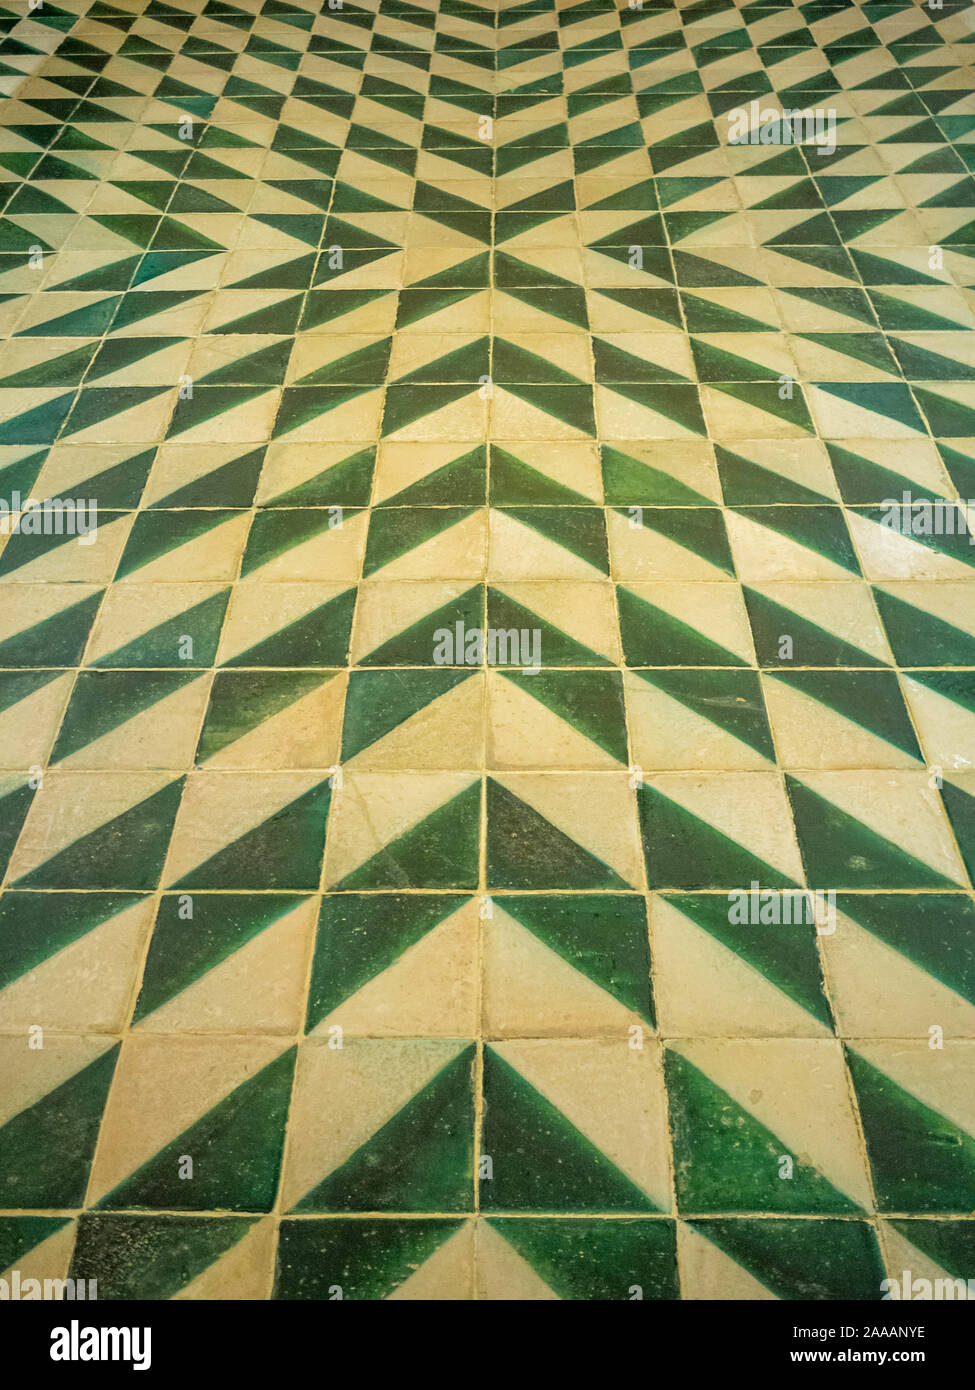 Optical effect in green and white floor tiles Stock Photo